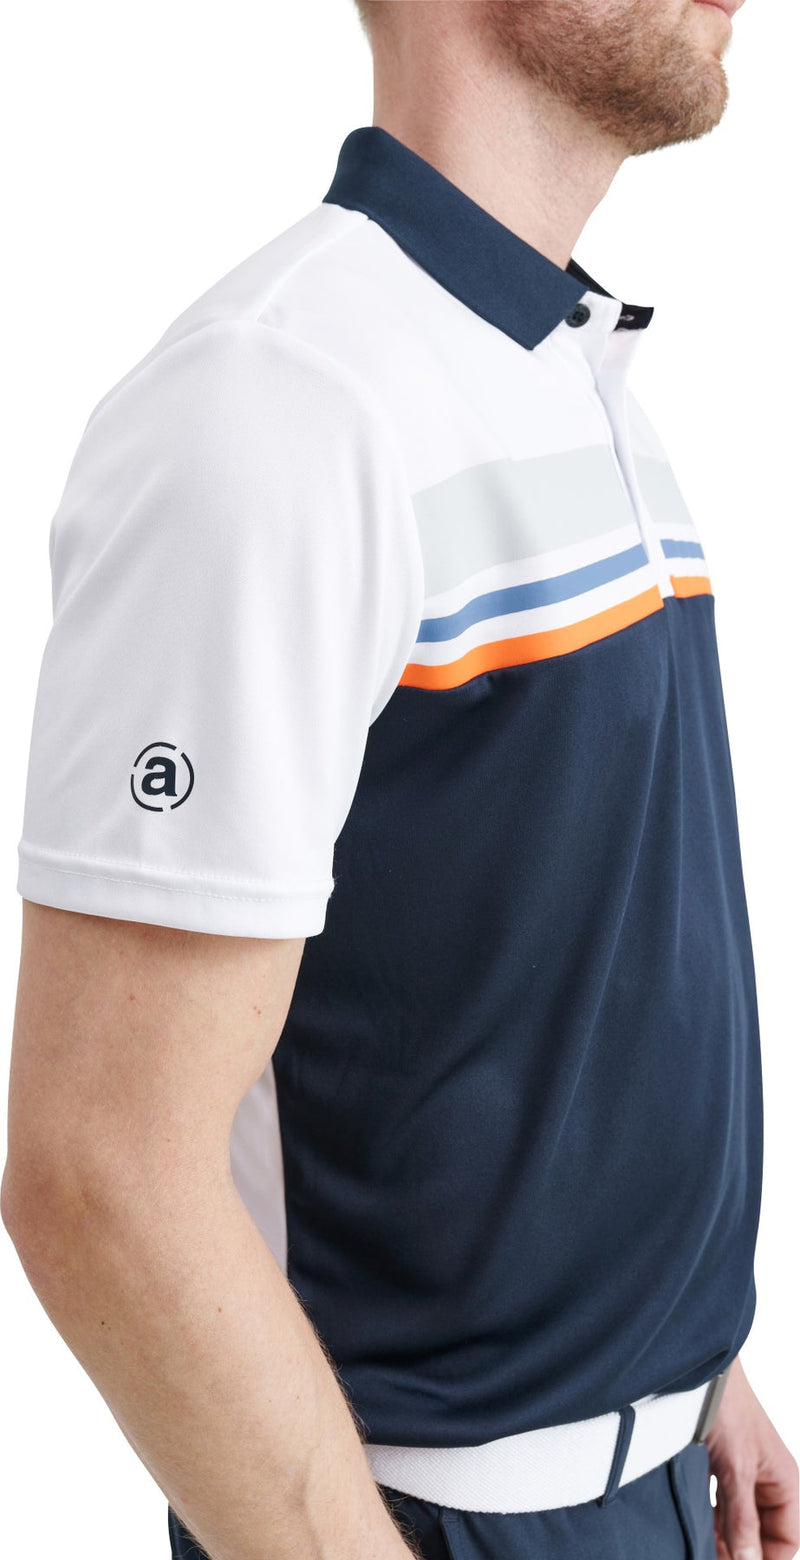 Abacus Sports Wear: Men's High-Performance Golf Polo - Tumble